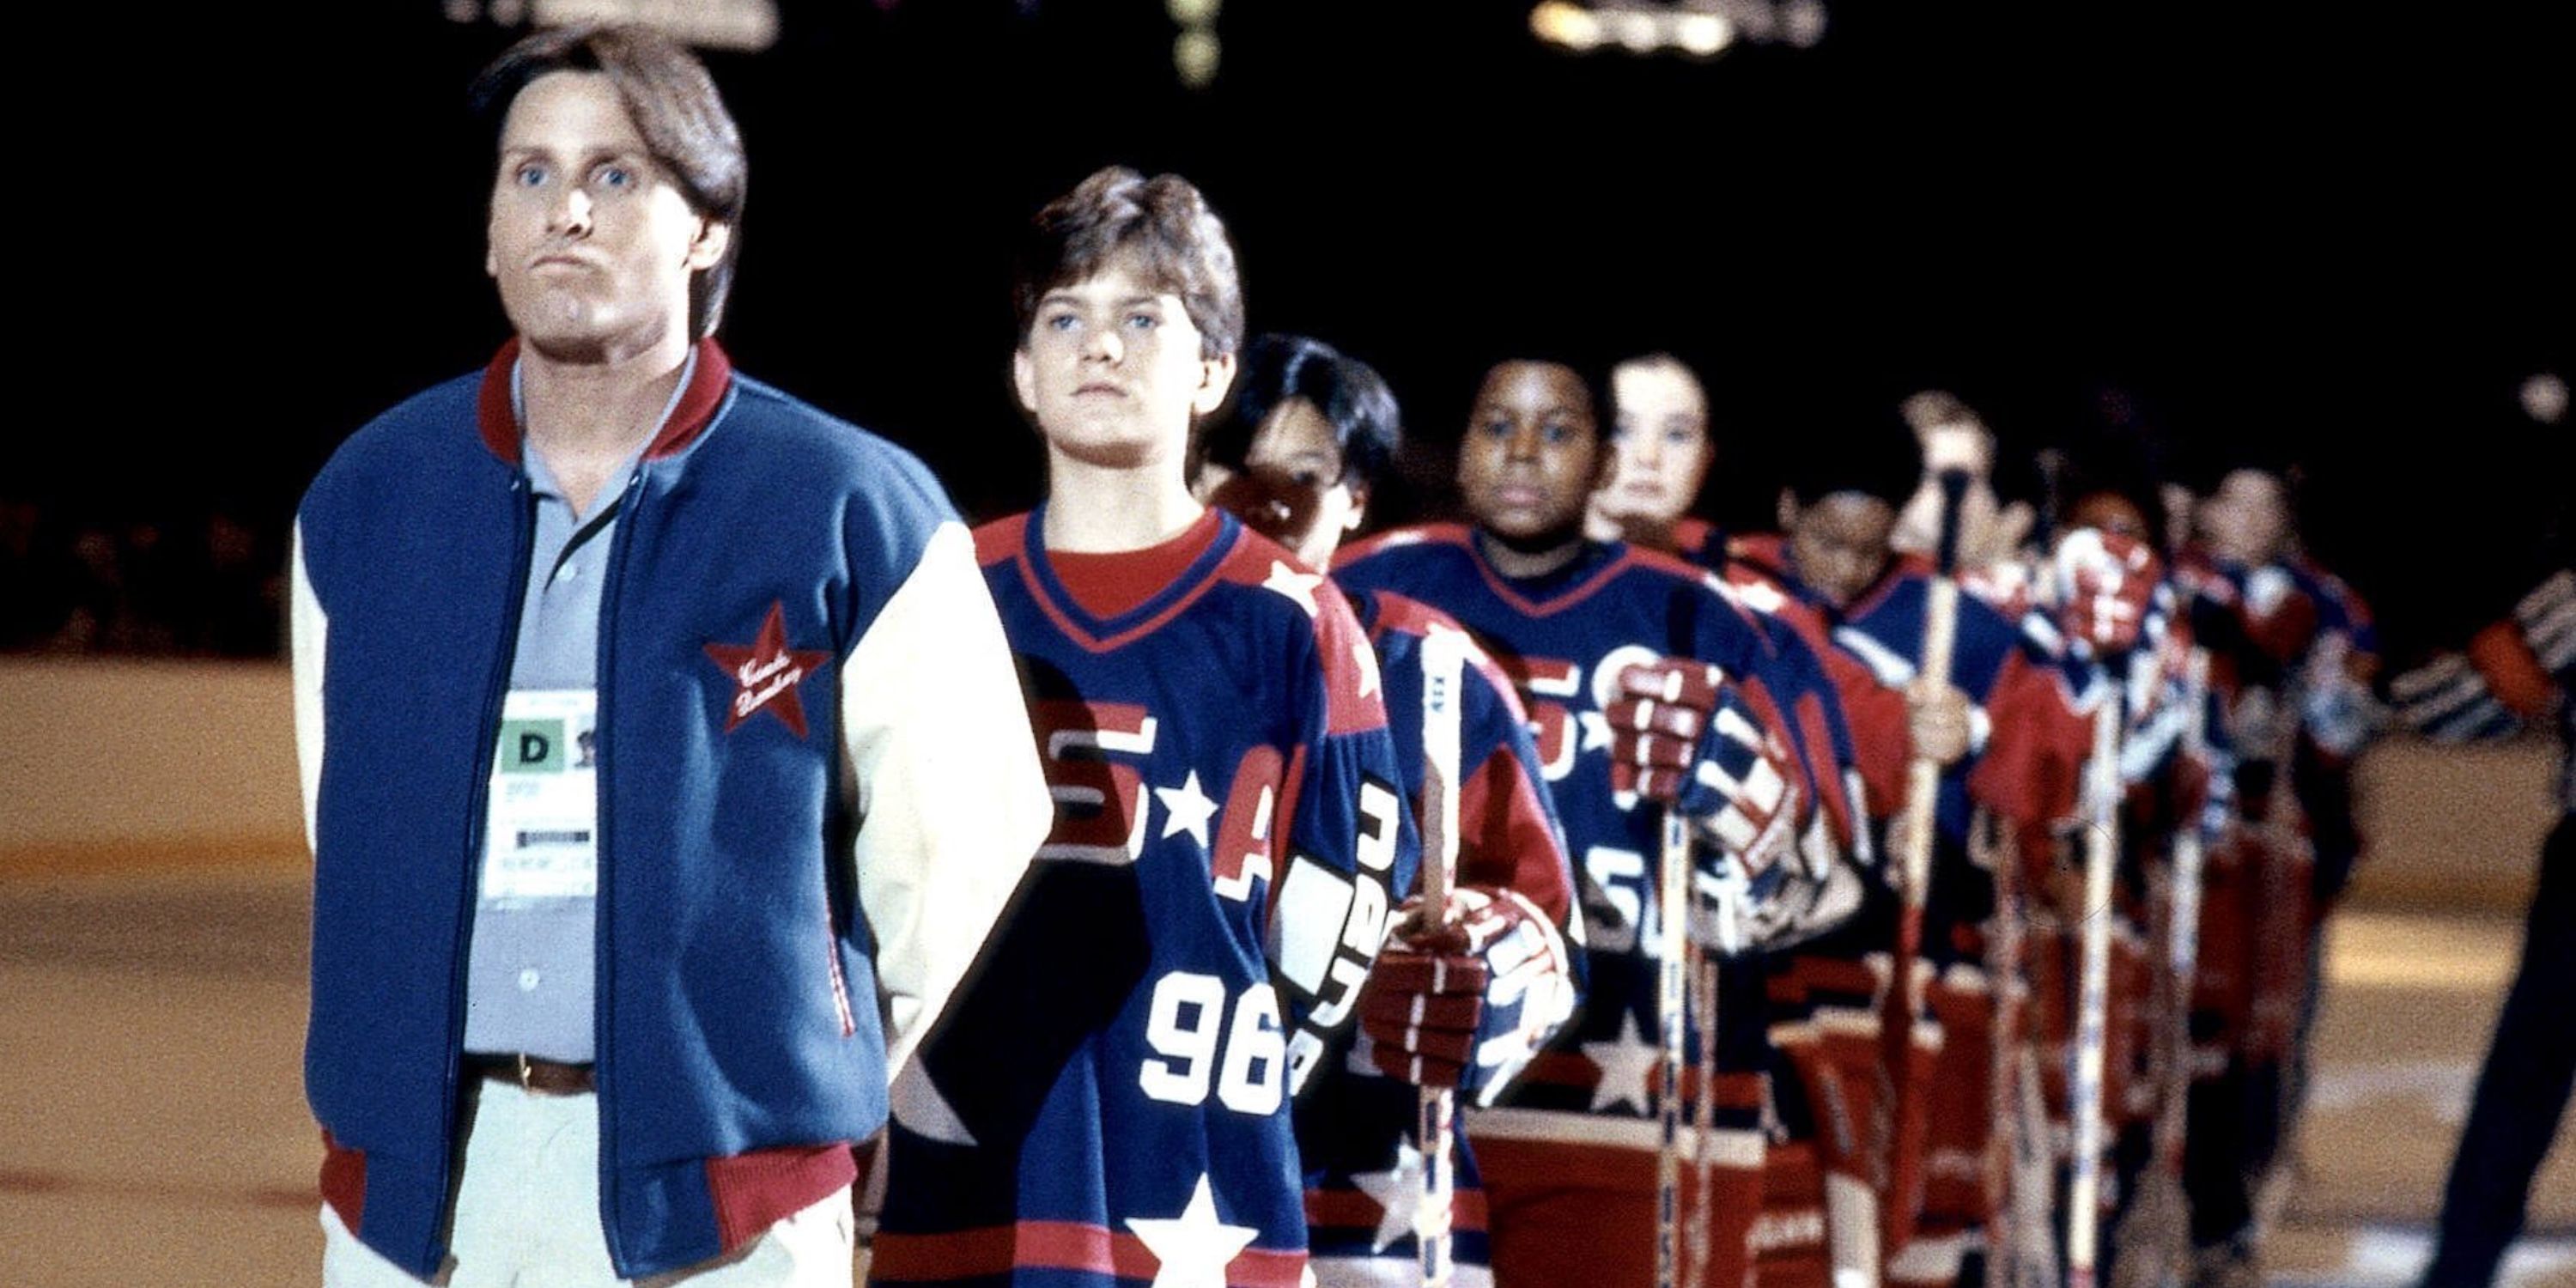 Mighty Ducks 4' could be happening, according to Averman and Charlie Conway  